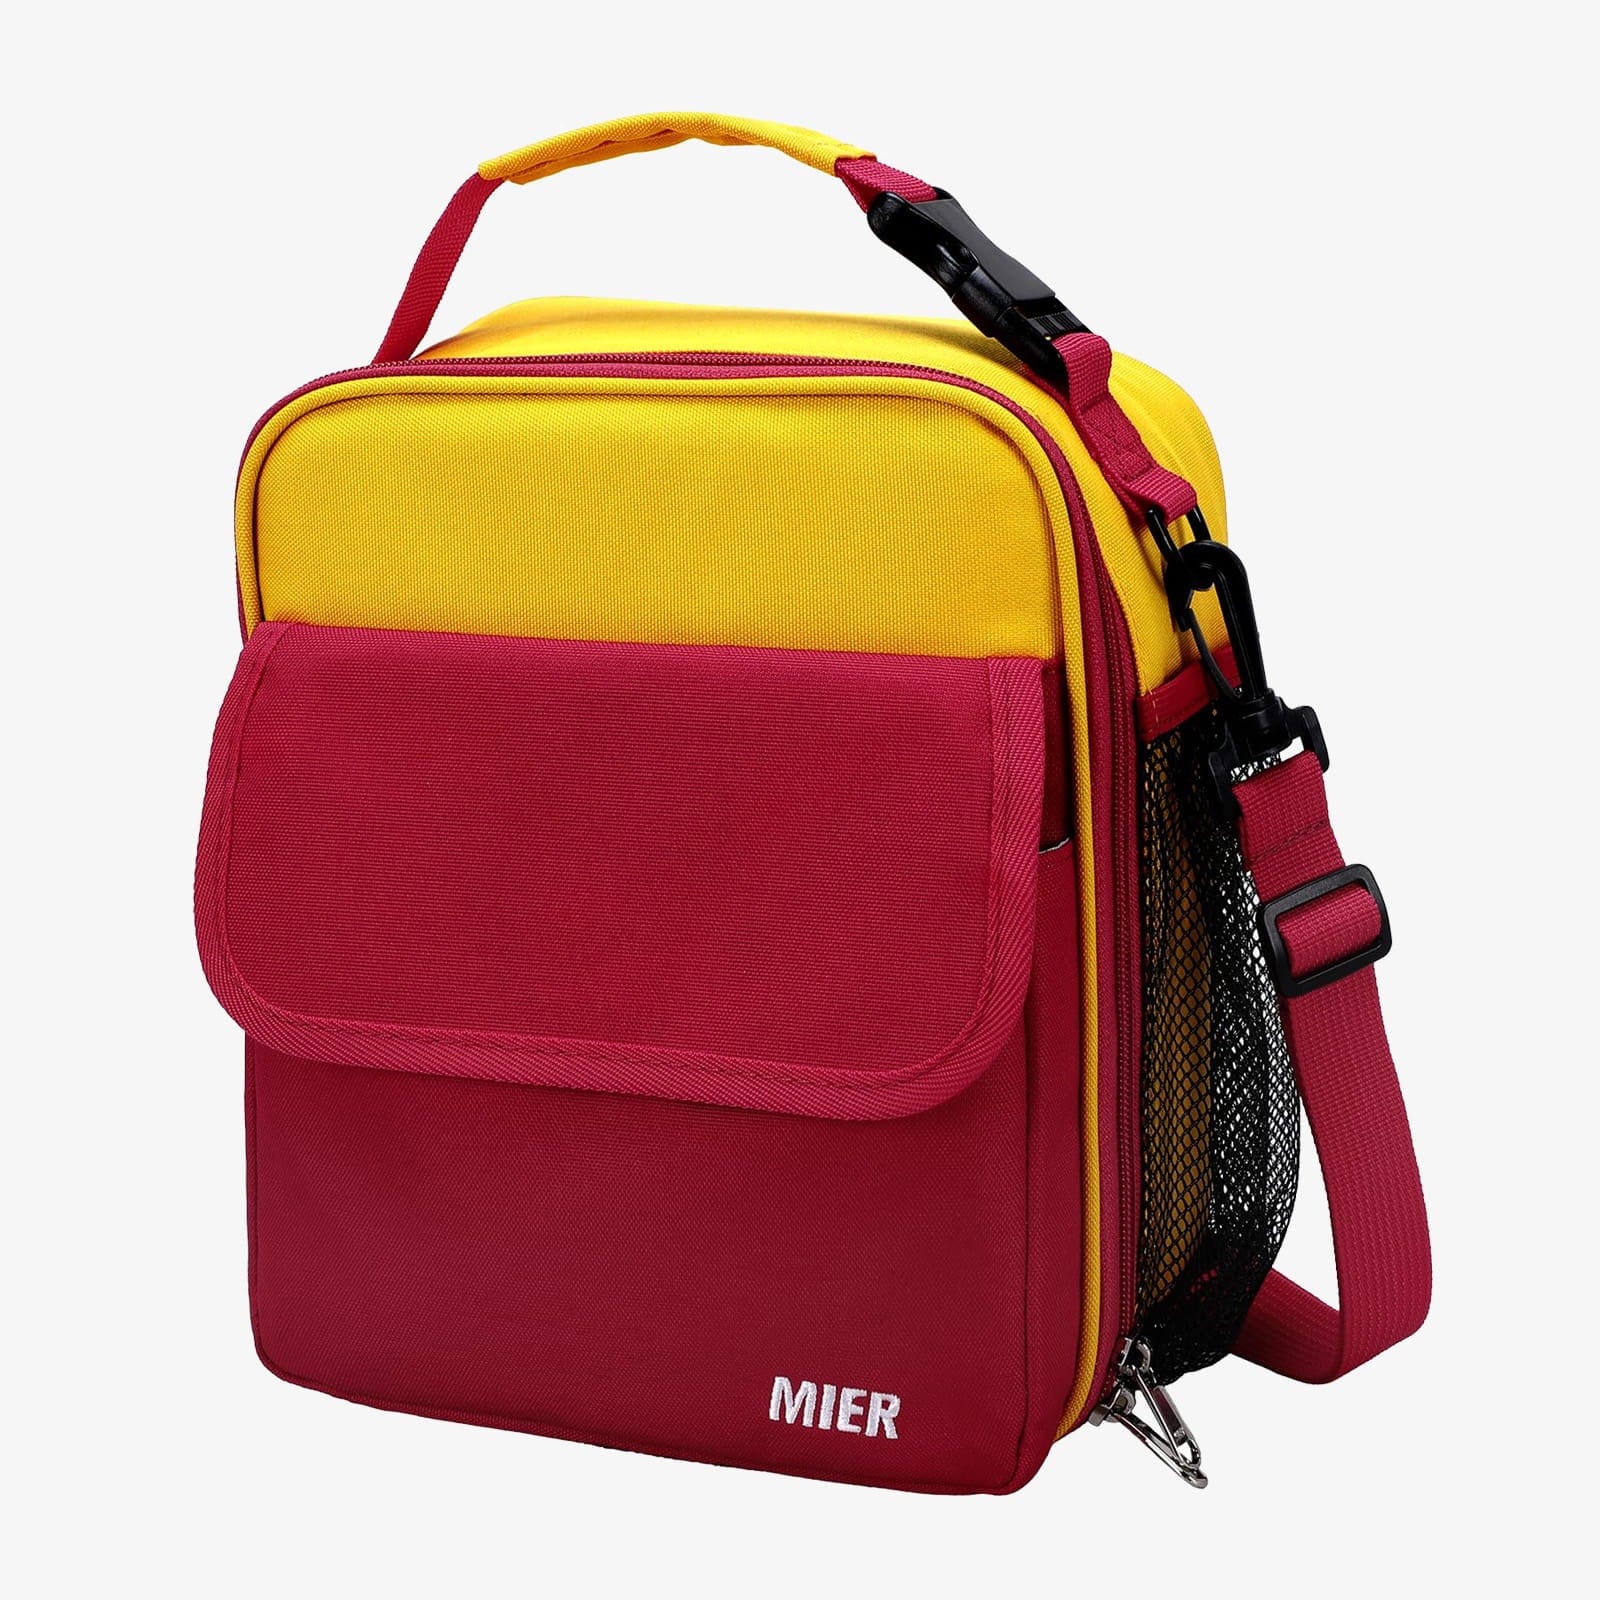 MIER Kids Lunch Bag for Boys Girls Insulated Toddlers Lunch Box Bags Kid  Lunch Cooler Tote for Schoo…See more MIER Kids Lunch Bag for Boys Girls